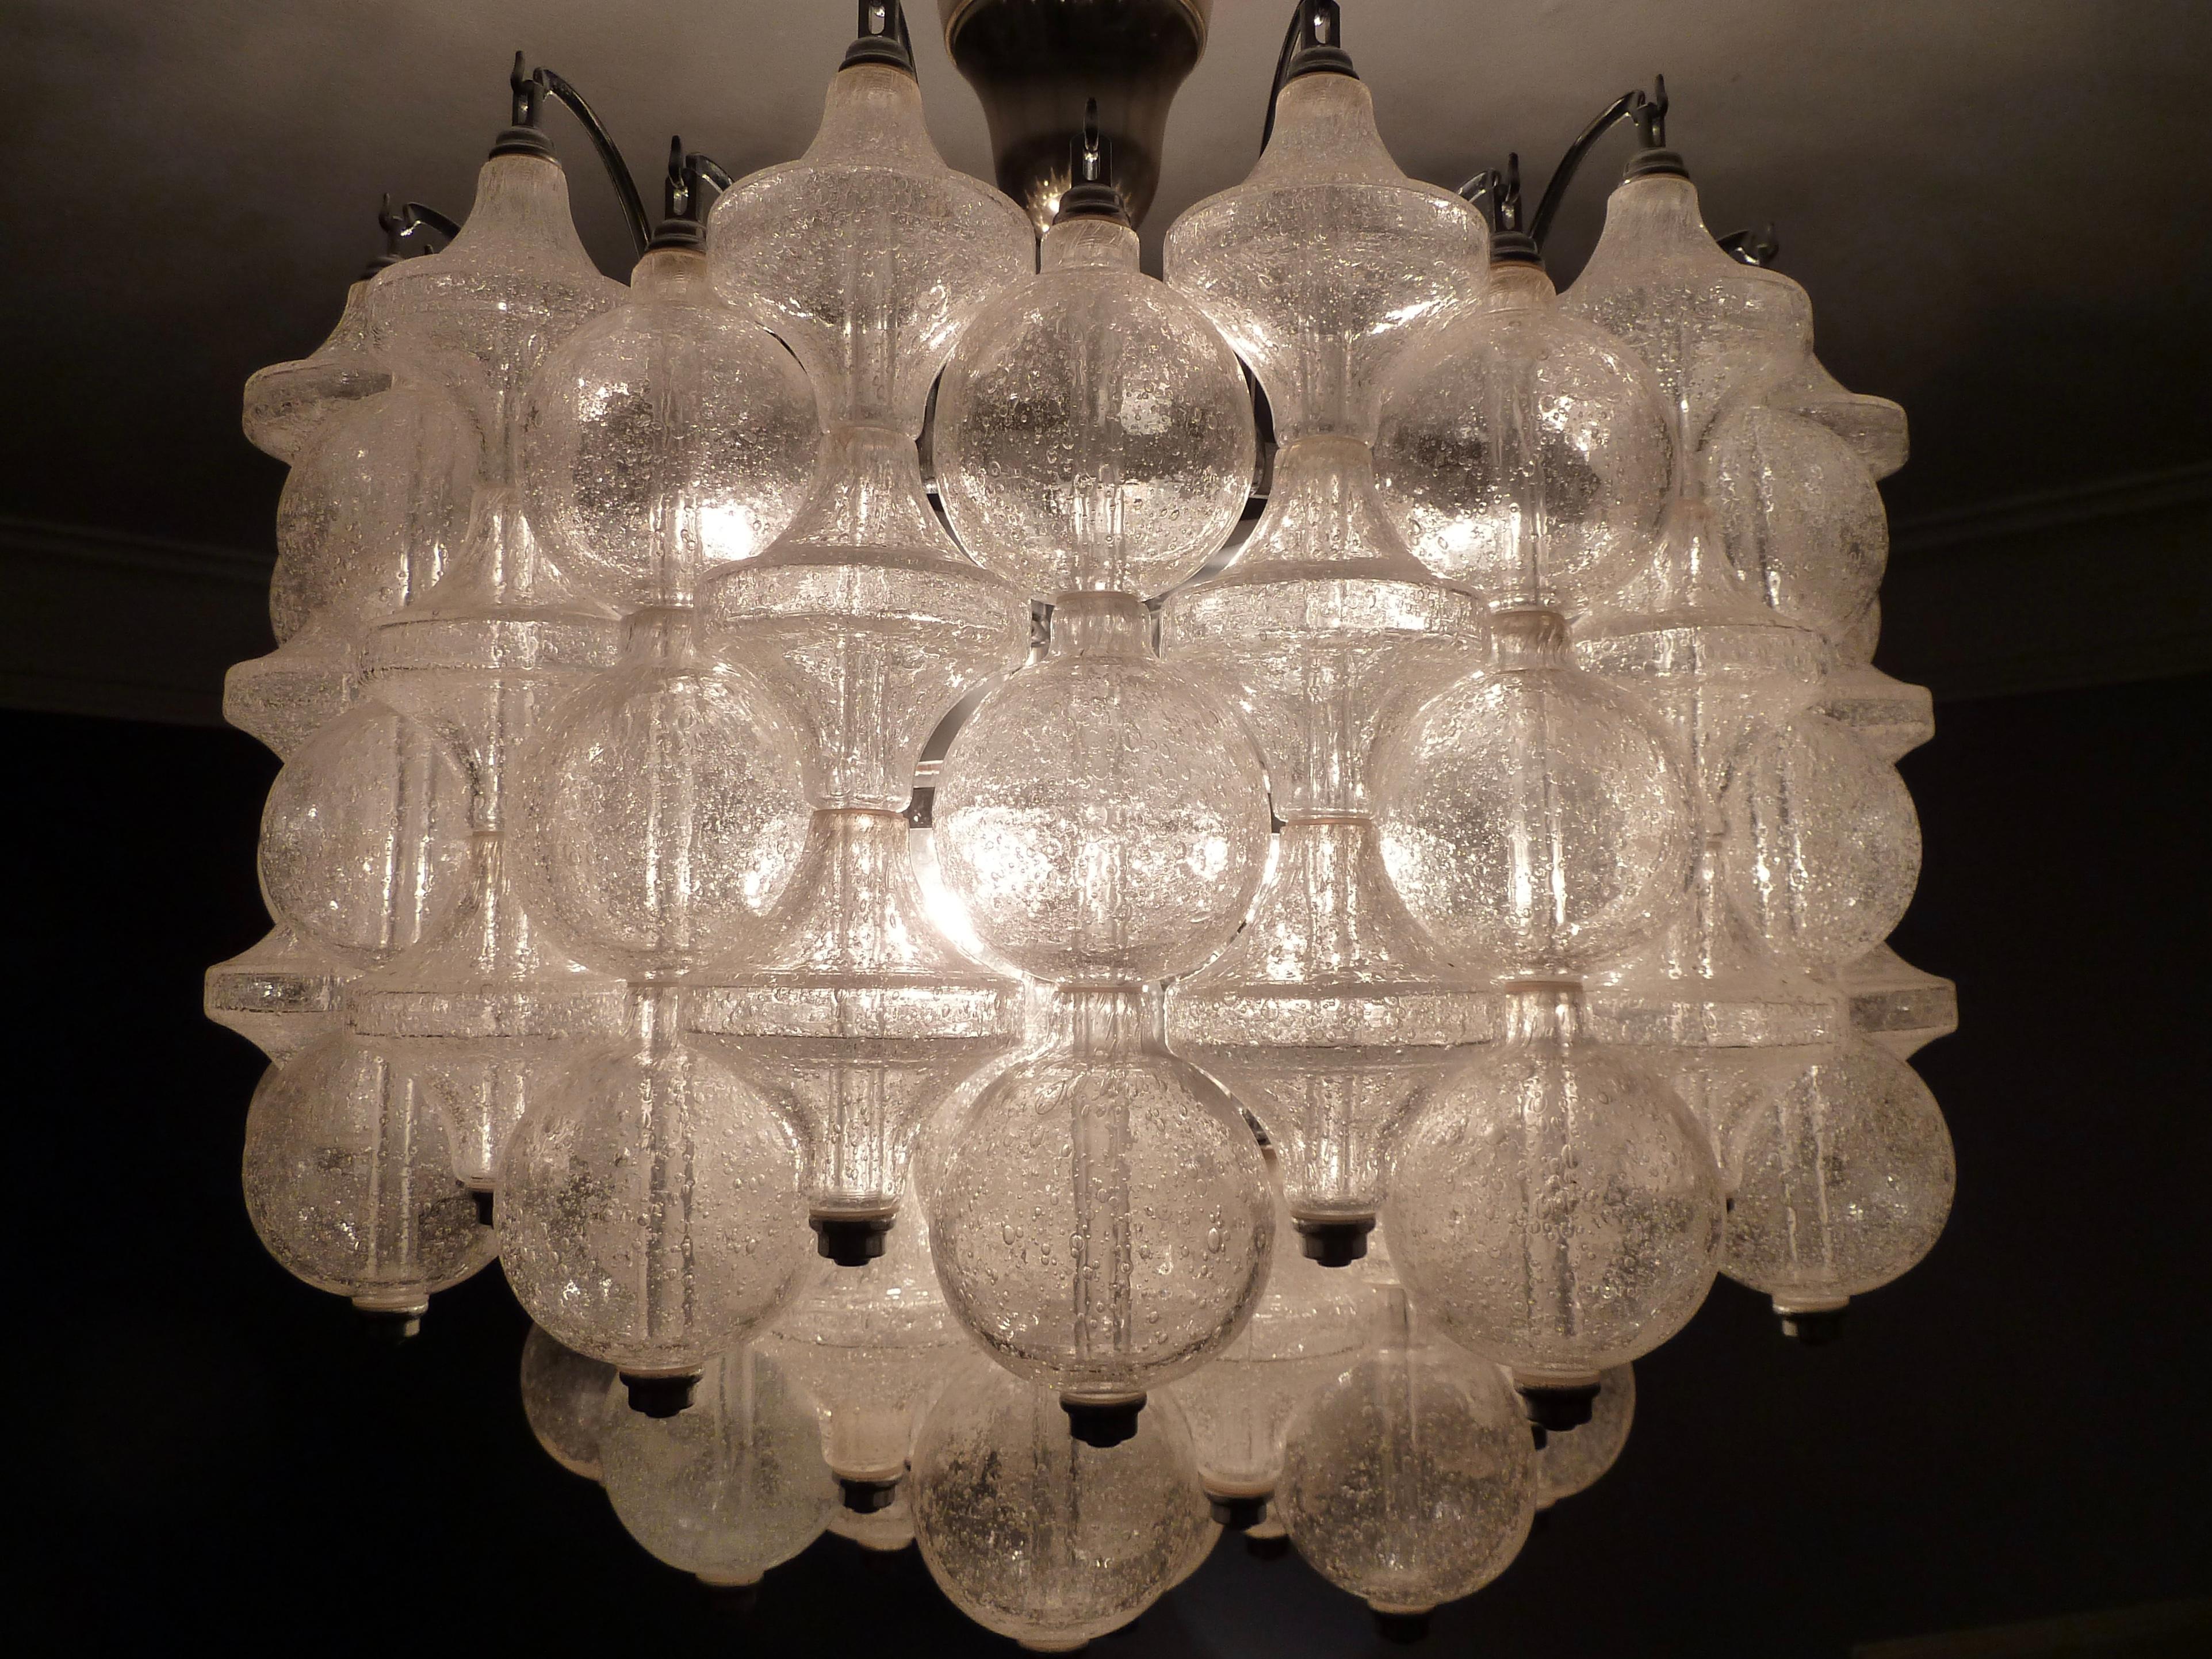 Rare Large and Bright 1970s Murano Seguso Ball Chandelier by OTT International For Sale 2